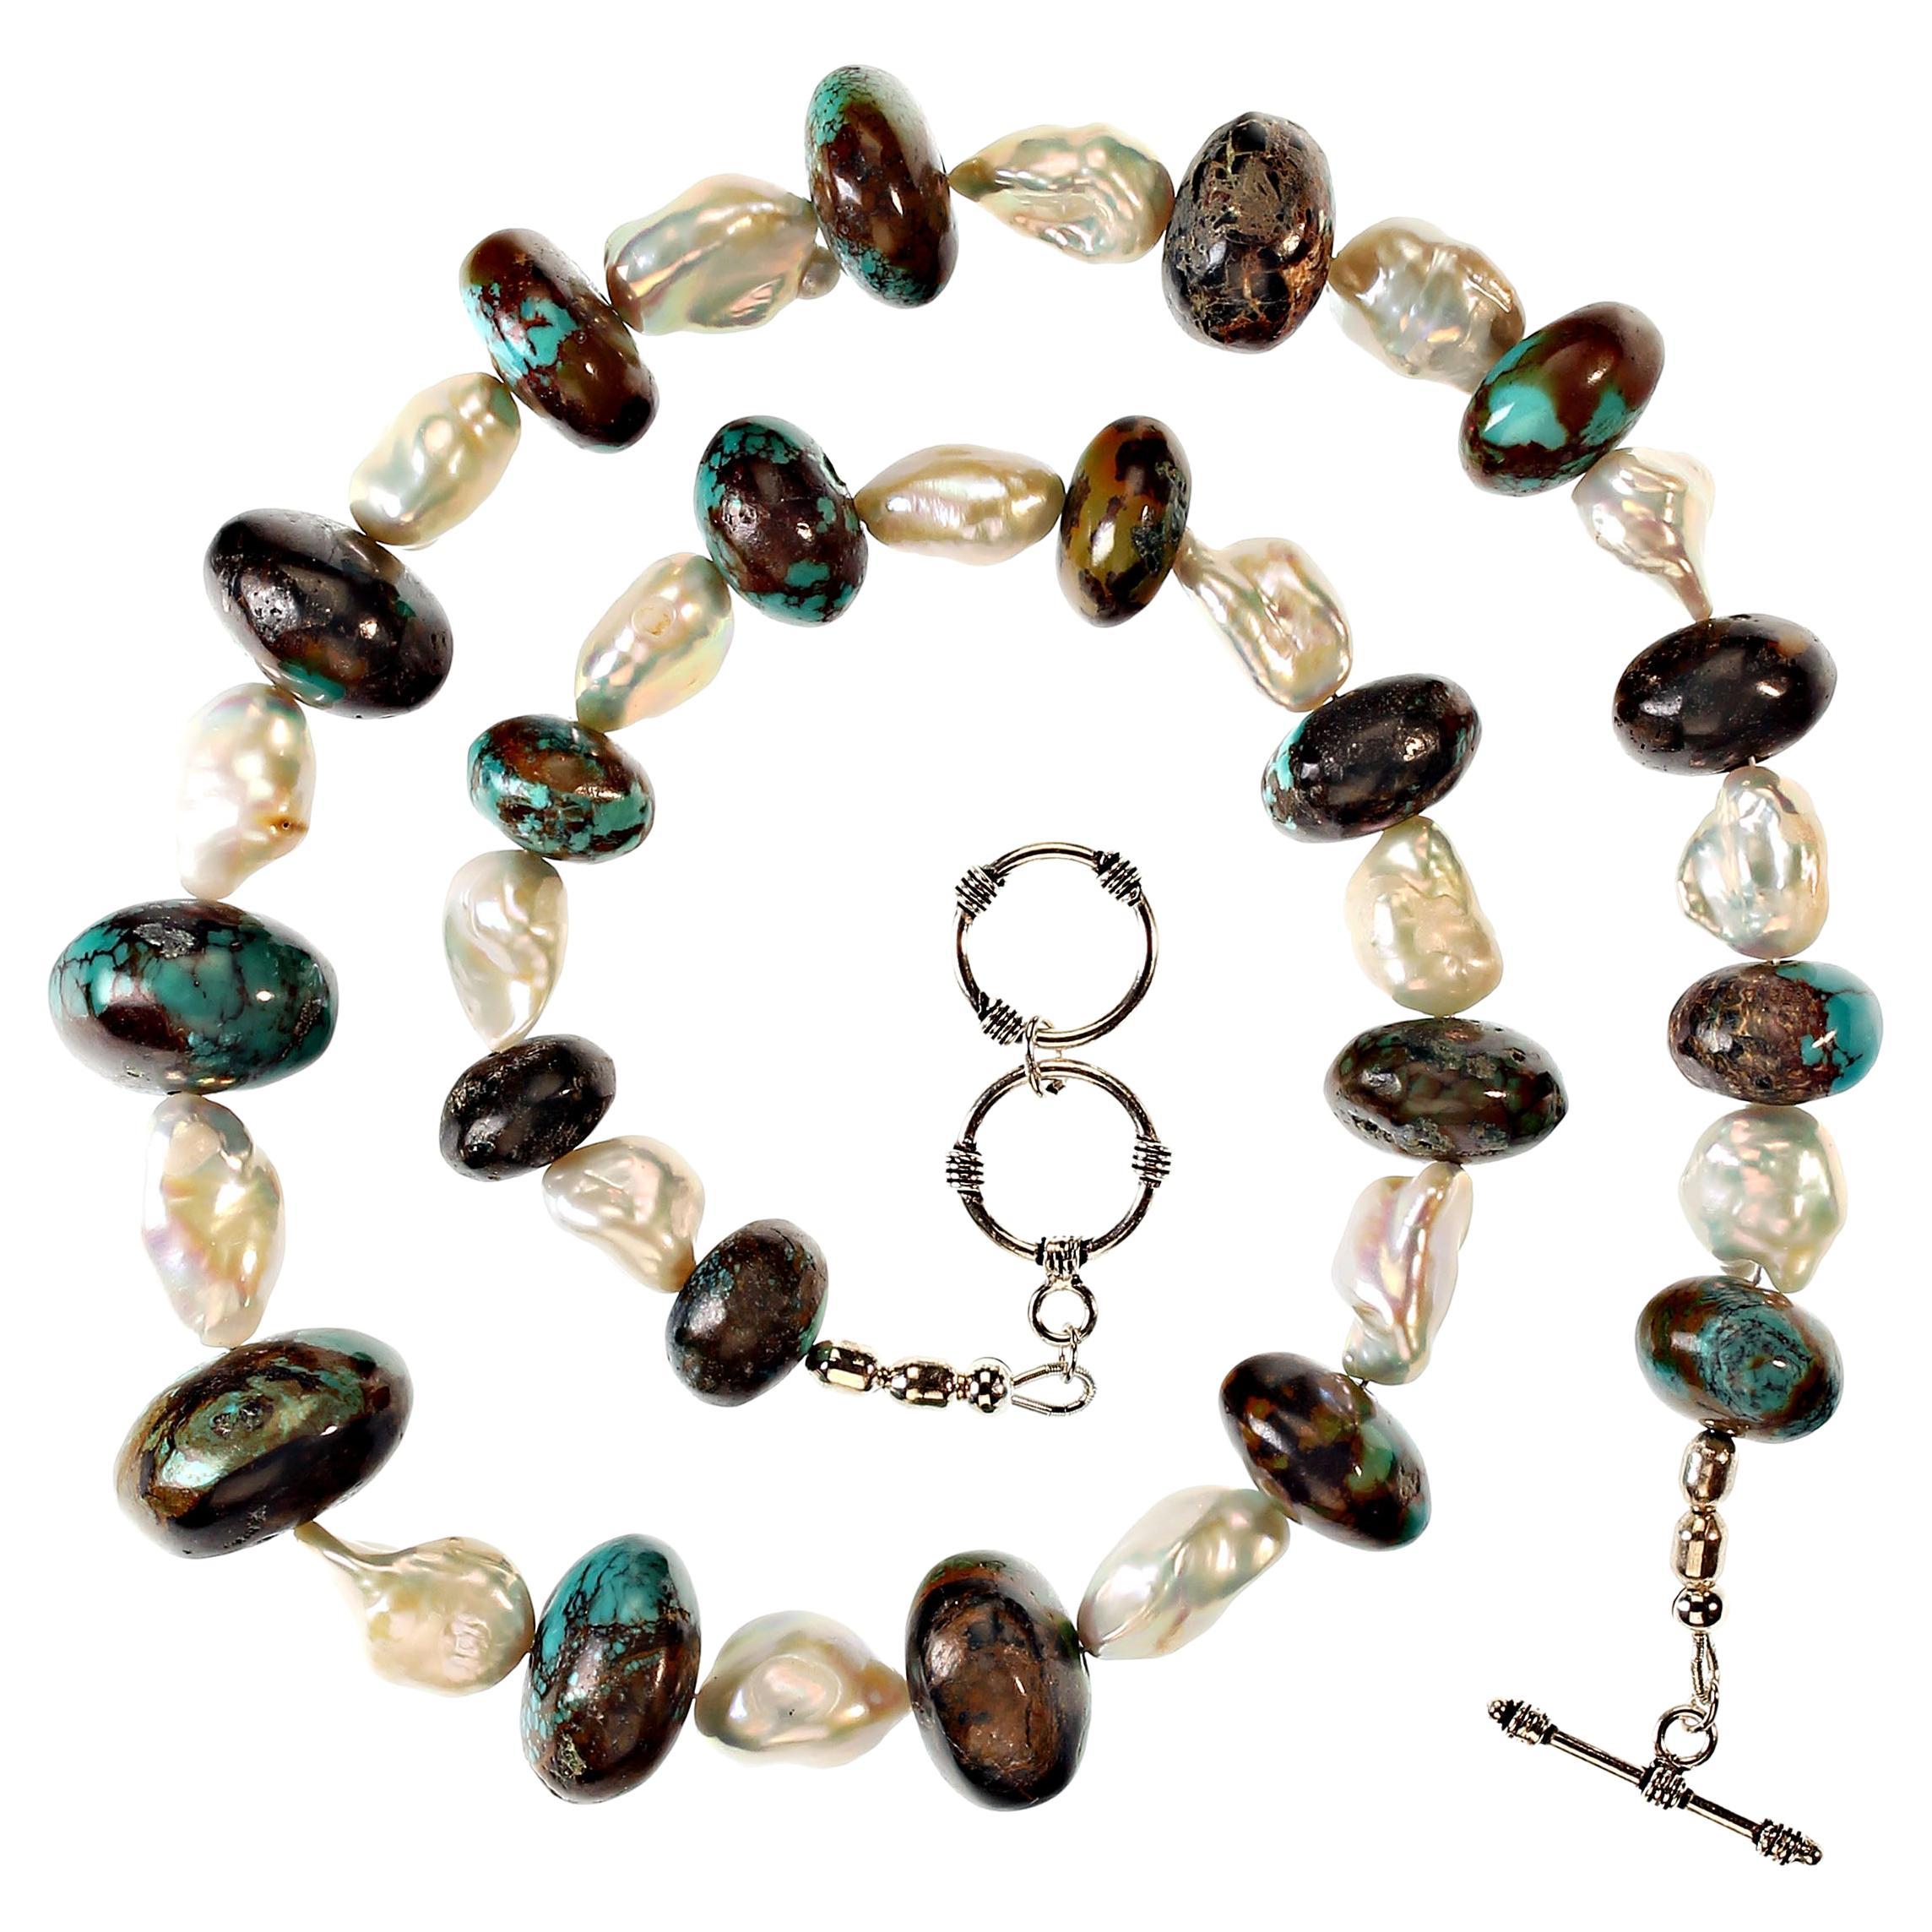 22 Inch necklace of graduated rounded rondelles of Hubei turquoise (up to 23mm) mixed with white freshwater pearls. The pearls have gorgeous luster with flashes of pink and blue. The necklace is secured with a silver-plate two loop toggle for easy